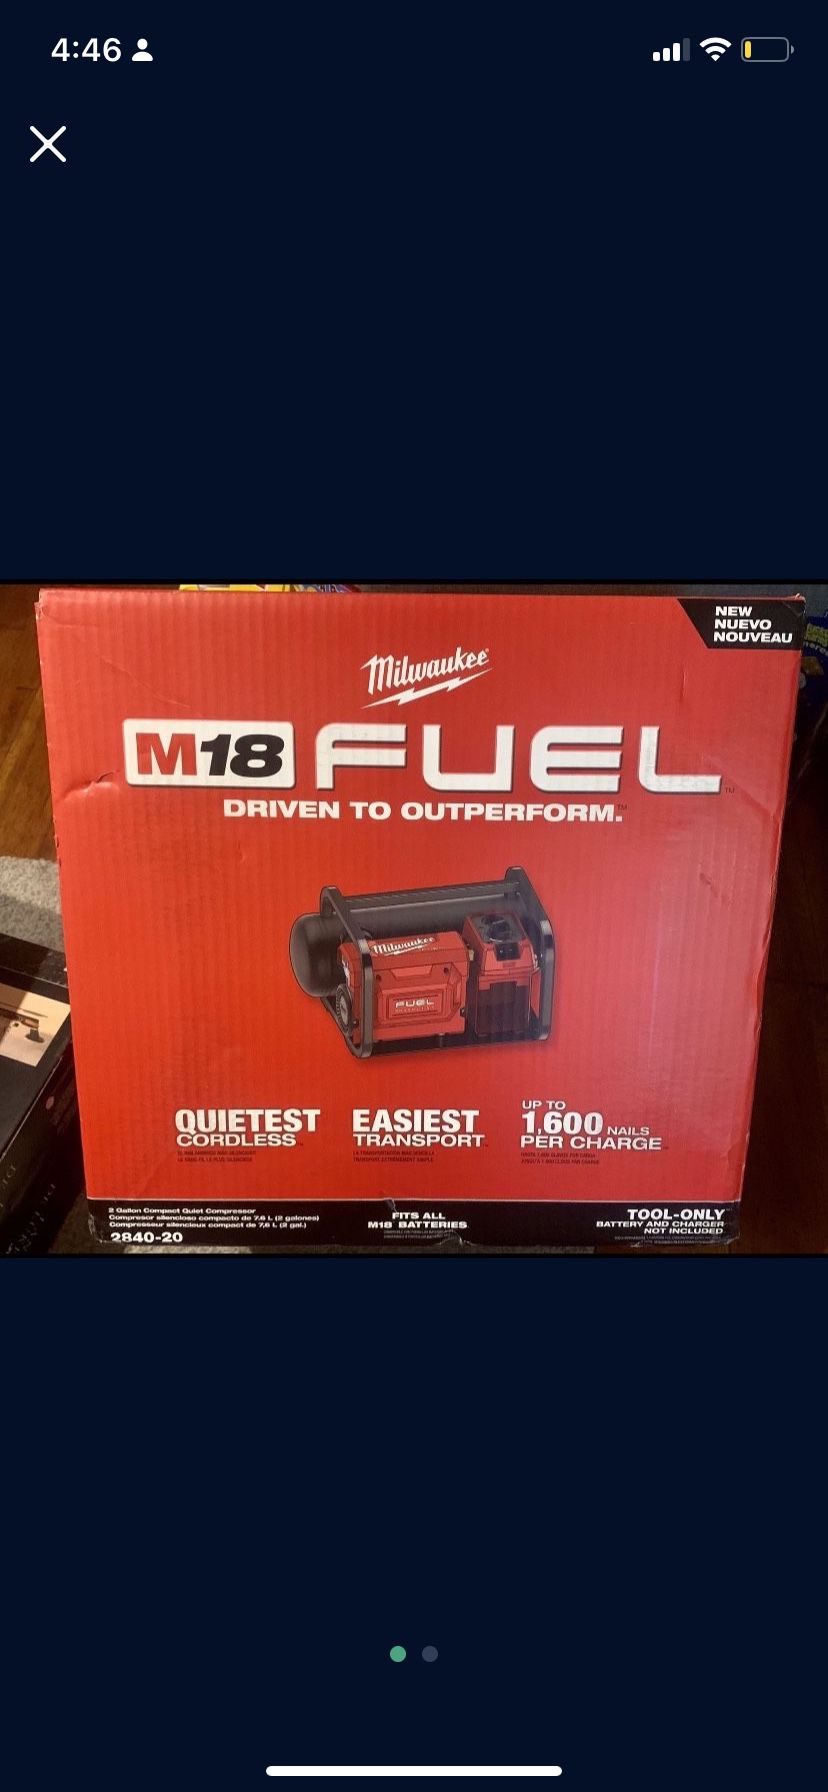 Milwaukee M18 FUEL 18-Volt Lithium-lon Brushless Cordless 2 Gal. Electric Compact Quiet Compressor (Tool-Only) 